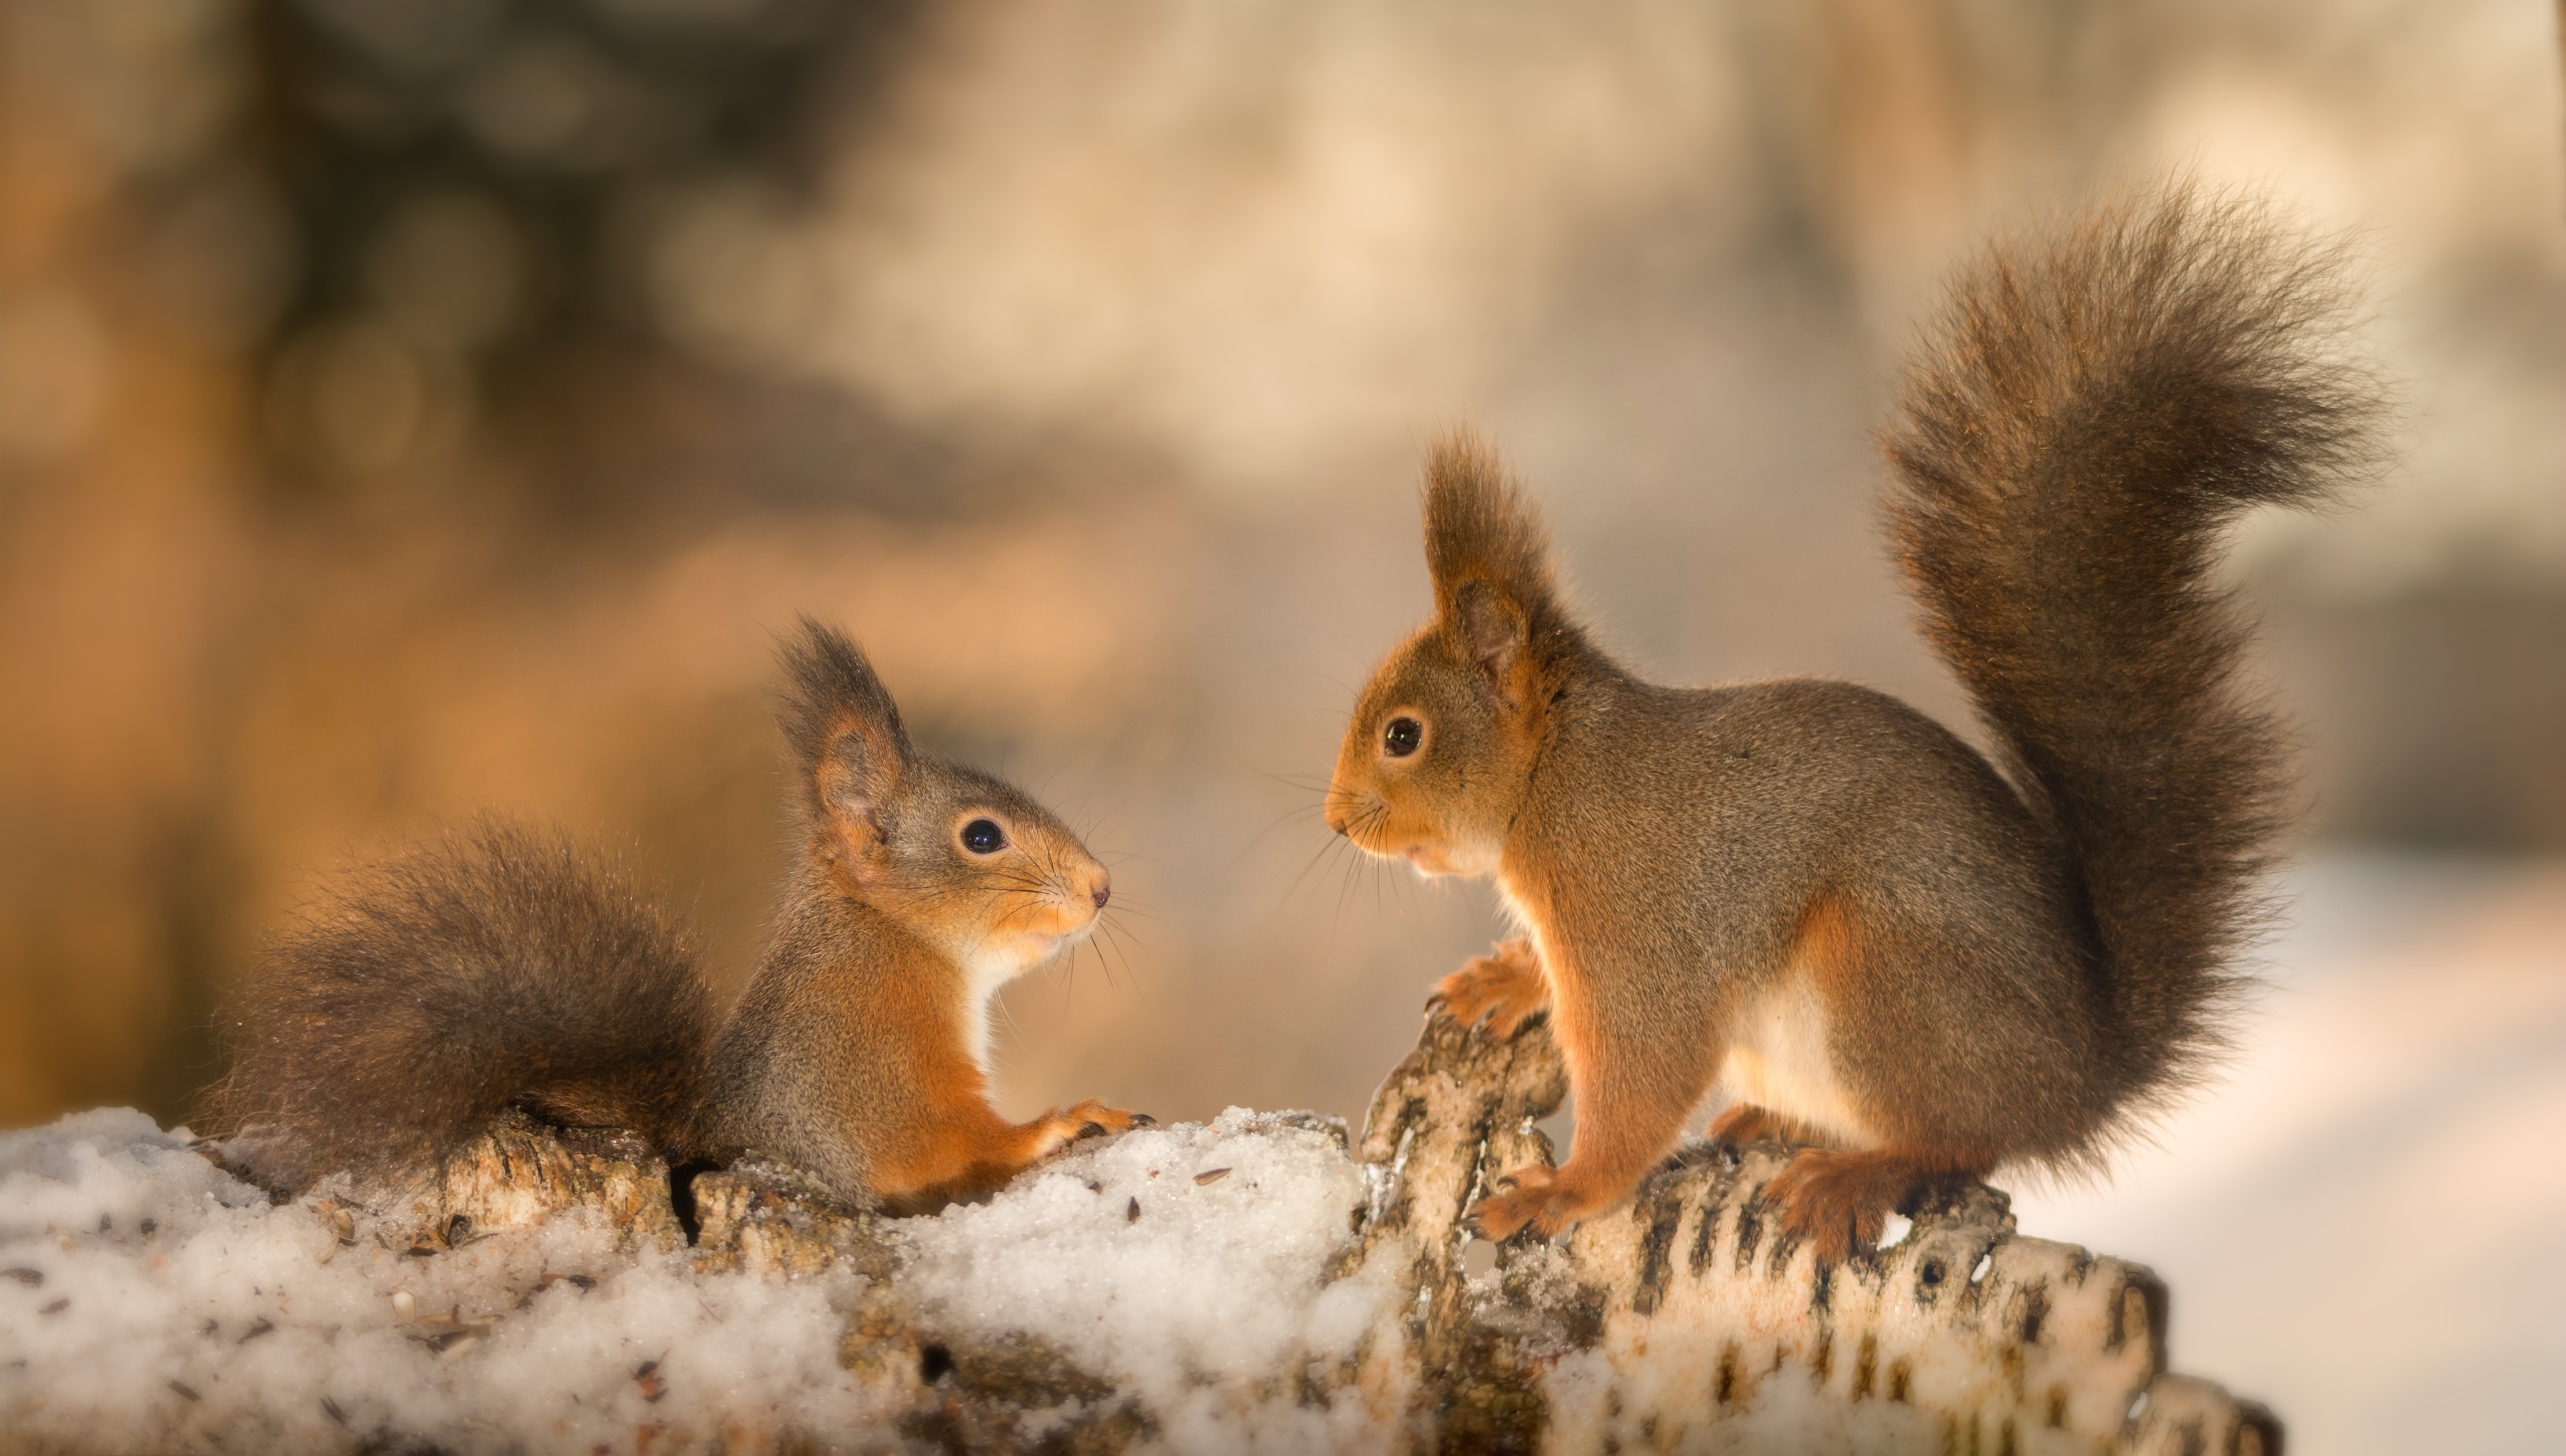 Stock photo of squirrels having a conversation to illustrate good supply chain etiquette.